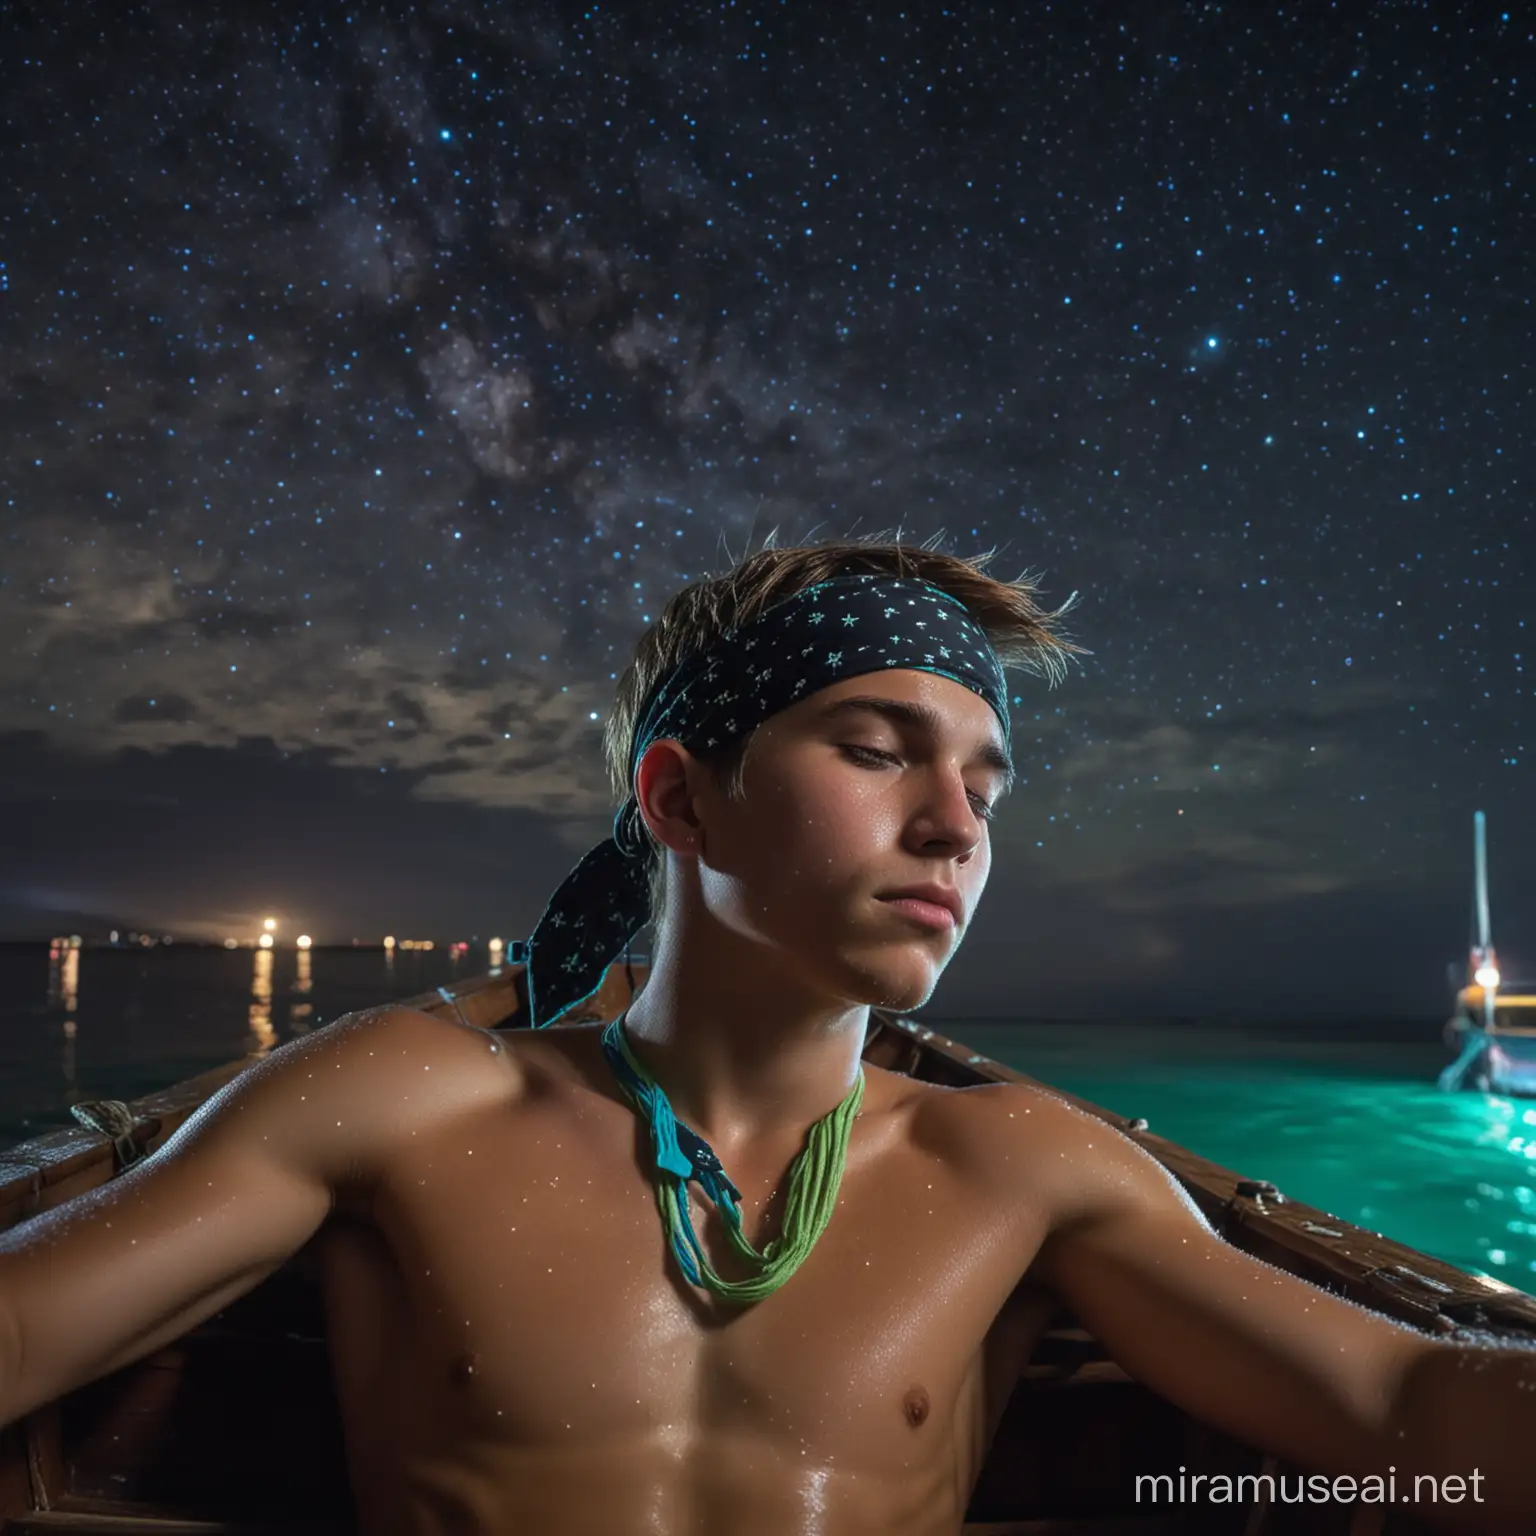 A sexy young shirtless muscular sweaty wet teen pirate boy sleeping. The boy must be a teenager very athletic and muscled. The boy wears a bandana. On a pirate boat on the water of a heavenly island. At night. With blue and green neon colors ambient. The sky is full of stars with a huge galaxy. The boy's body must be seen fully.